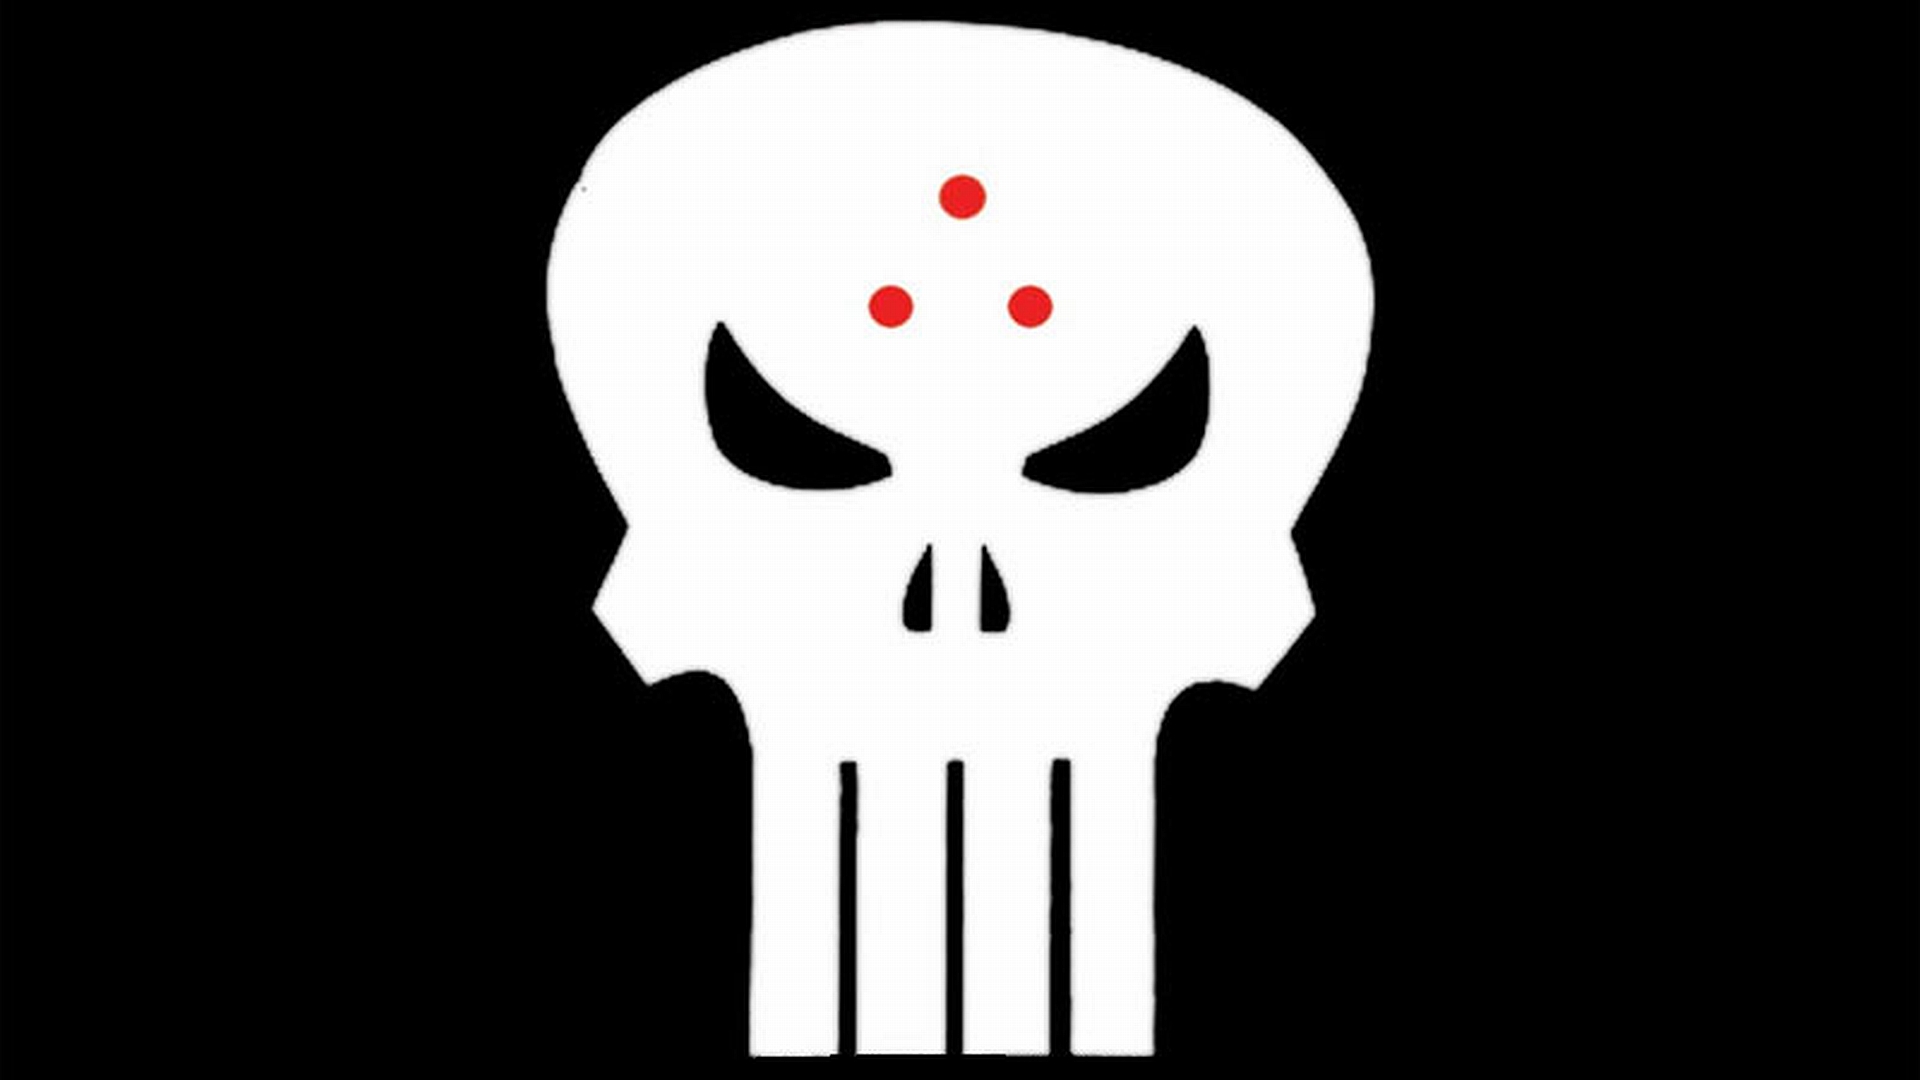 Punisher character from Comics in a striking desktop wallpaper.